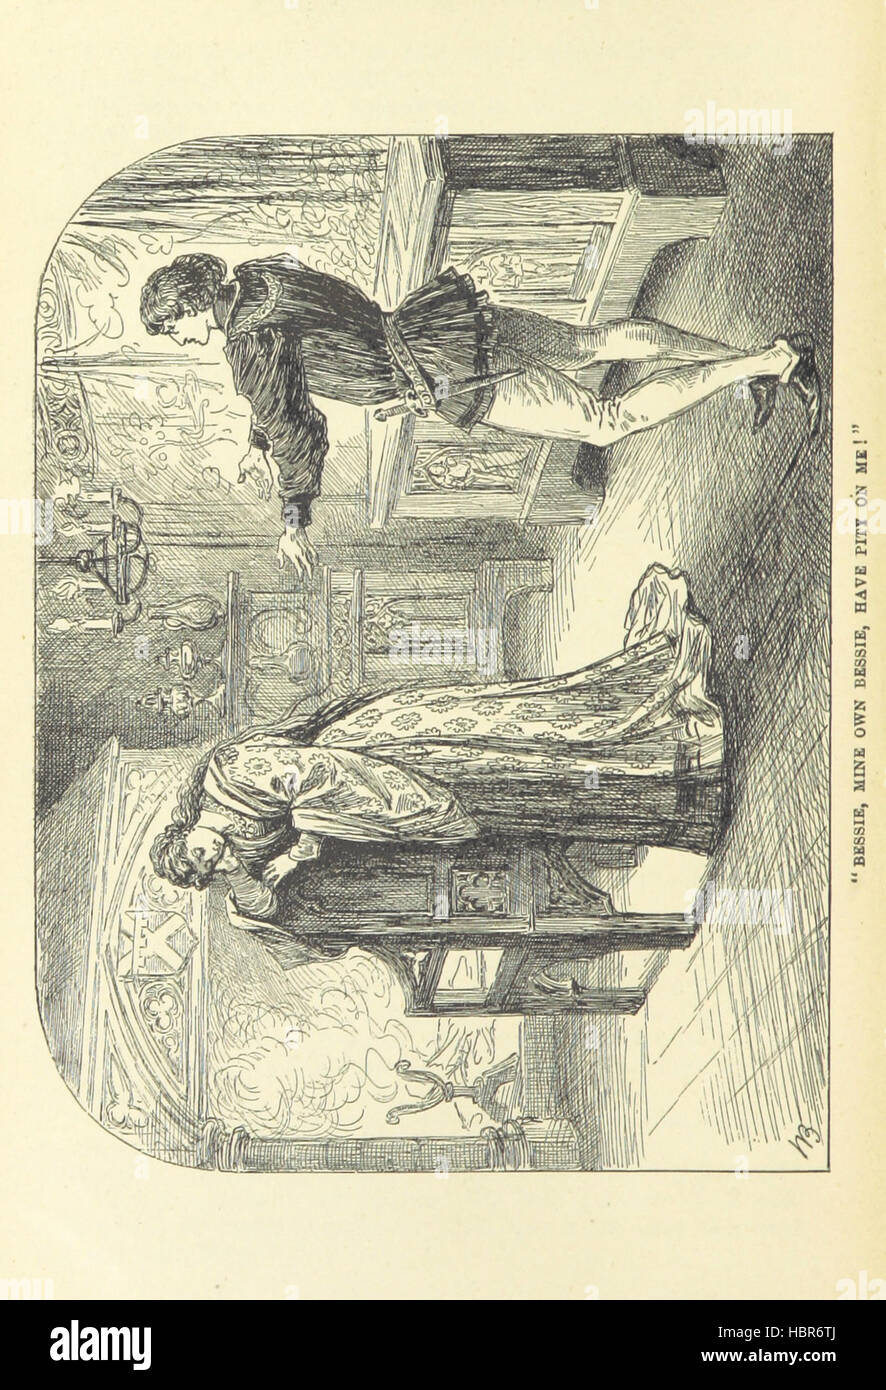 Image taken from page 300 of 'The Goldsmith's Ward: a tale of London City in the 15th century ... With ... illustrations' Image taken from page 300 of 'The Goldsmith's Ward a Stock Photo